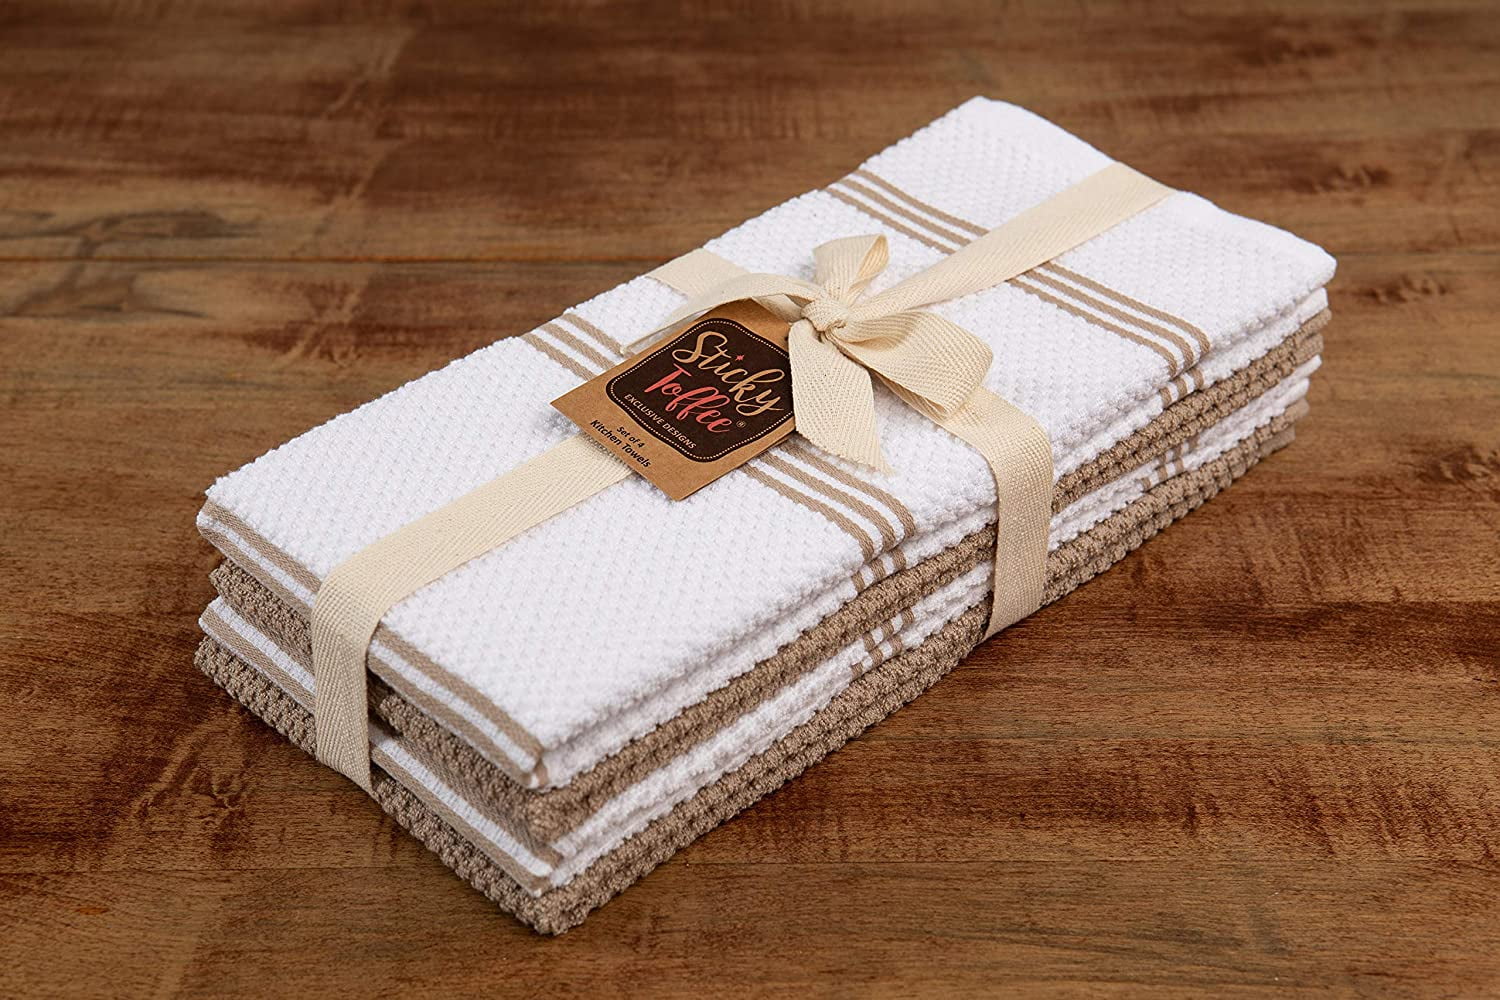 Sticky Toffee Mixed Pack Kitchen Dish Towels, 4 Pack, 28 x 16